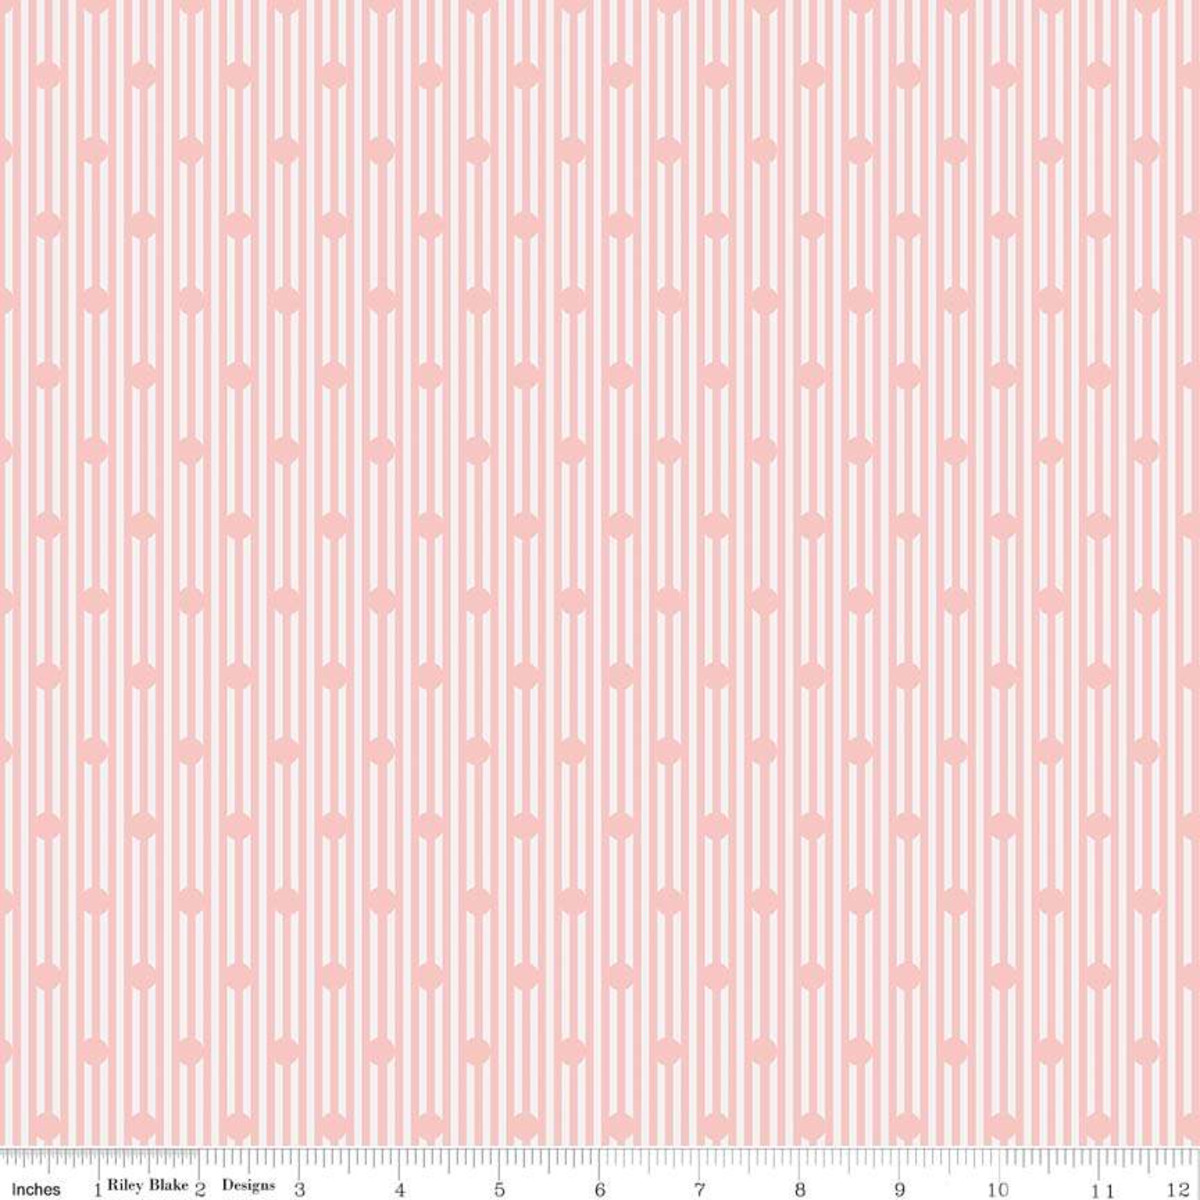 Sweet Stems 8277 Dot Pink by Sue Daley for Riley Blake Fabrics  Applique, patchwork and quilting fabric. rics  Applique, patchwork and quilting fabric